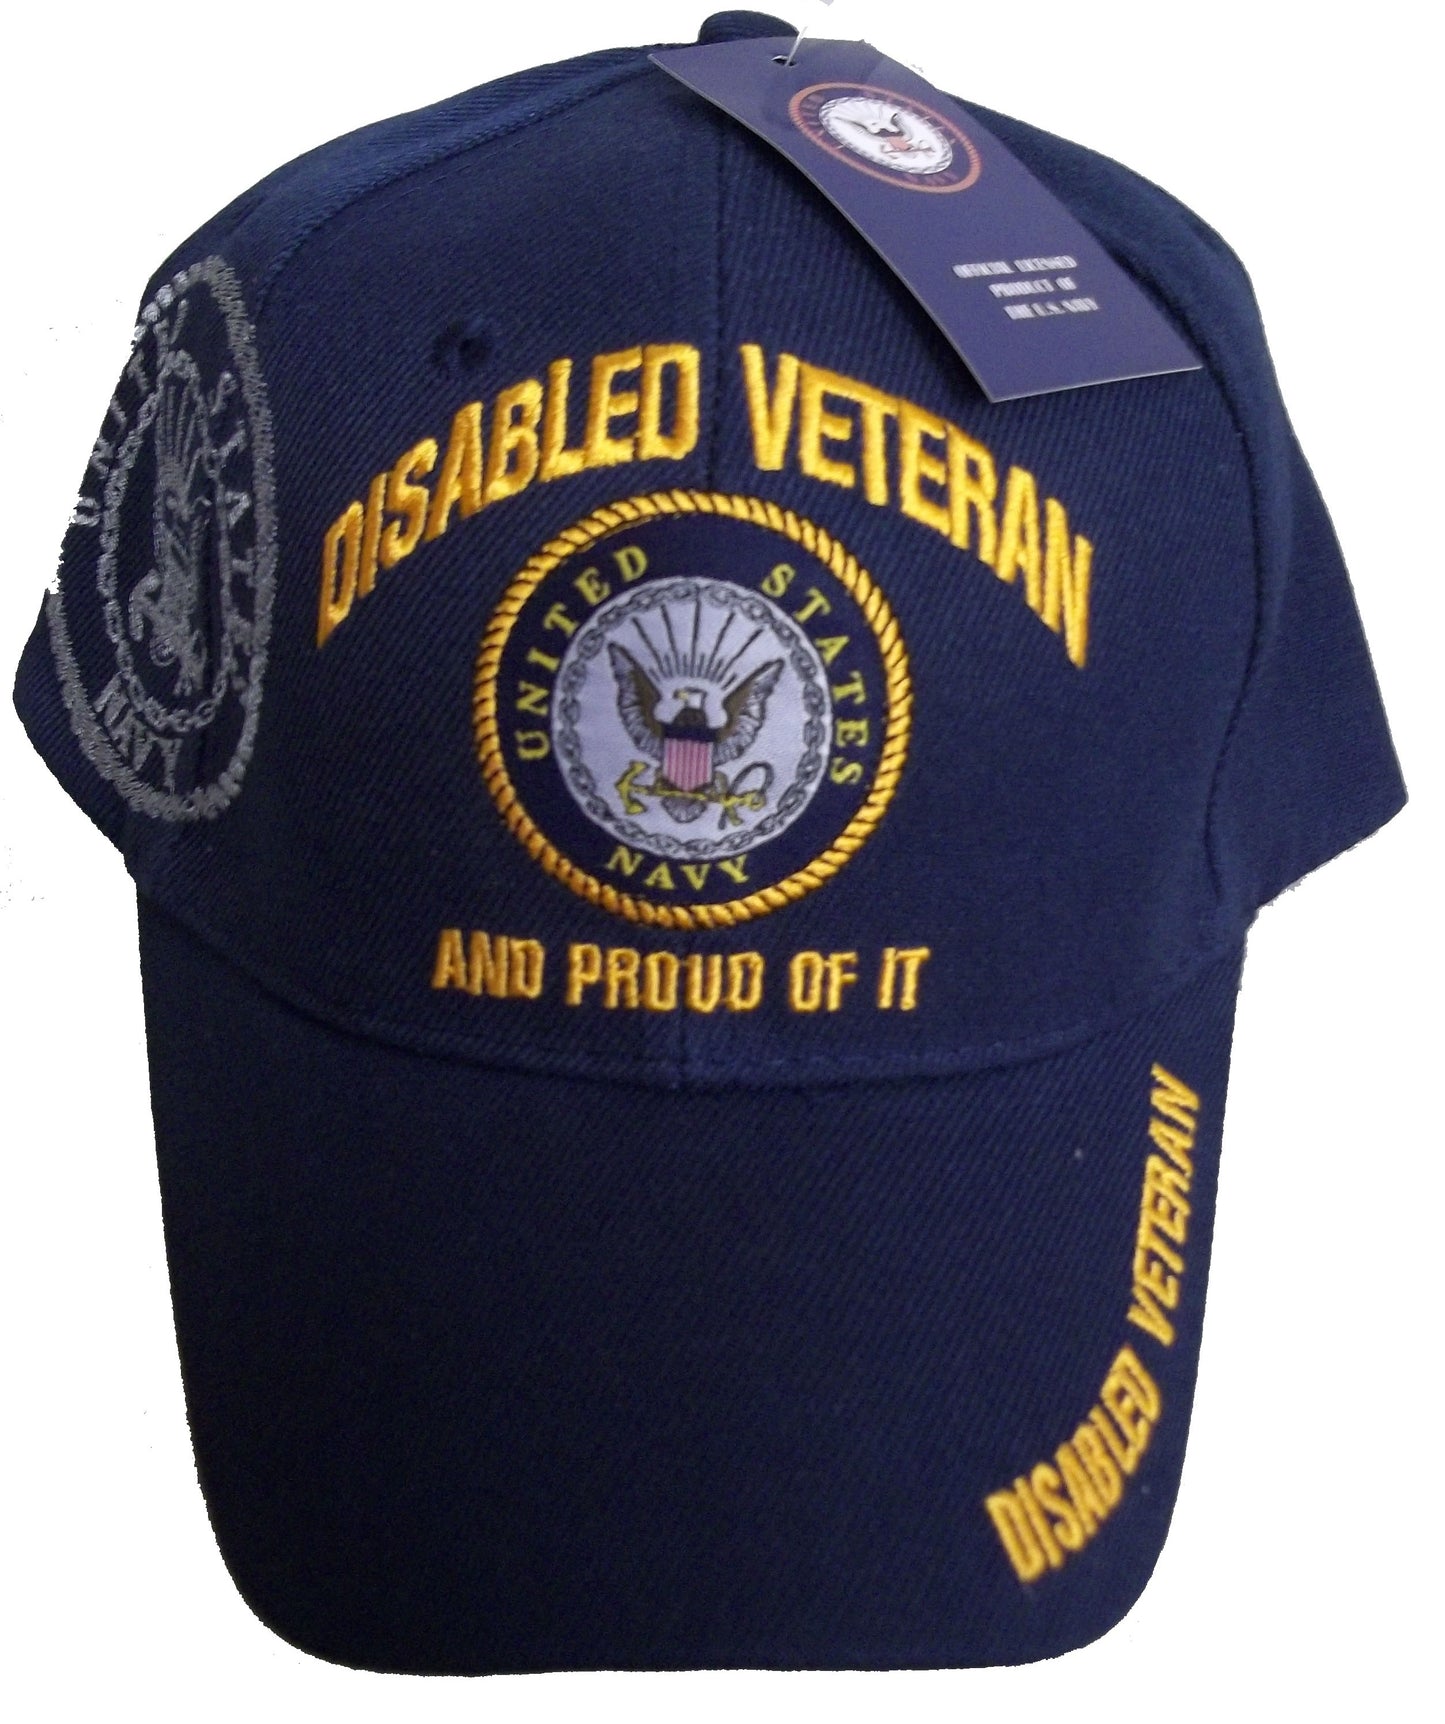 DISABLED NAVY VETERAN PROUD OF IT BASEBALL STYLE EMBROIDERED HAT usa dnv cap